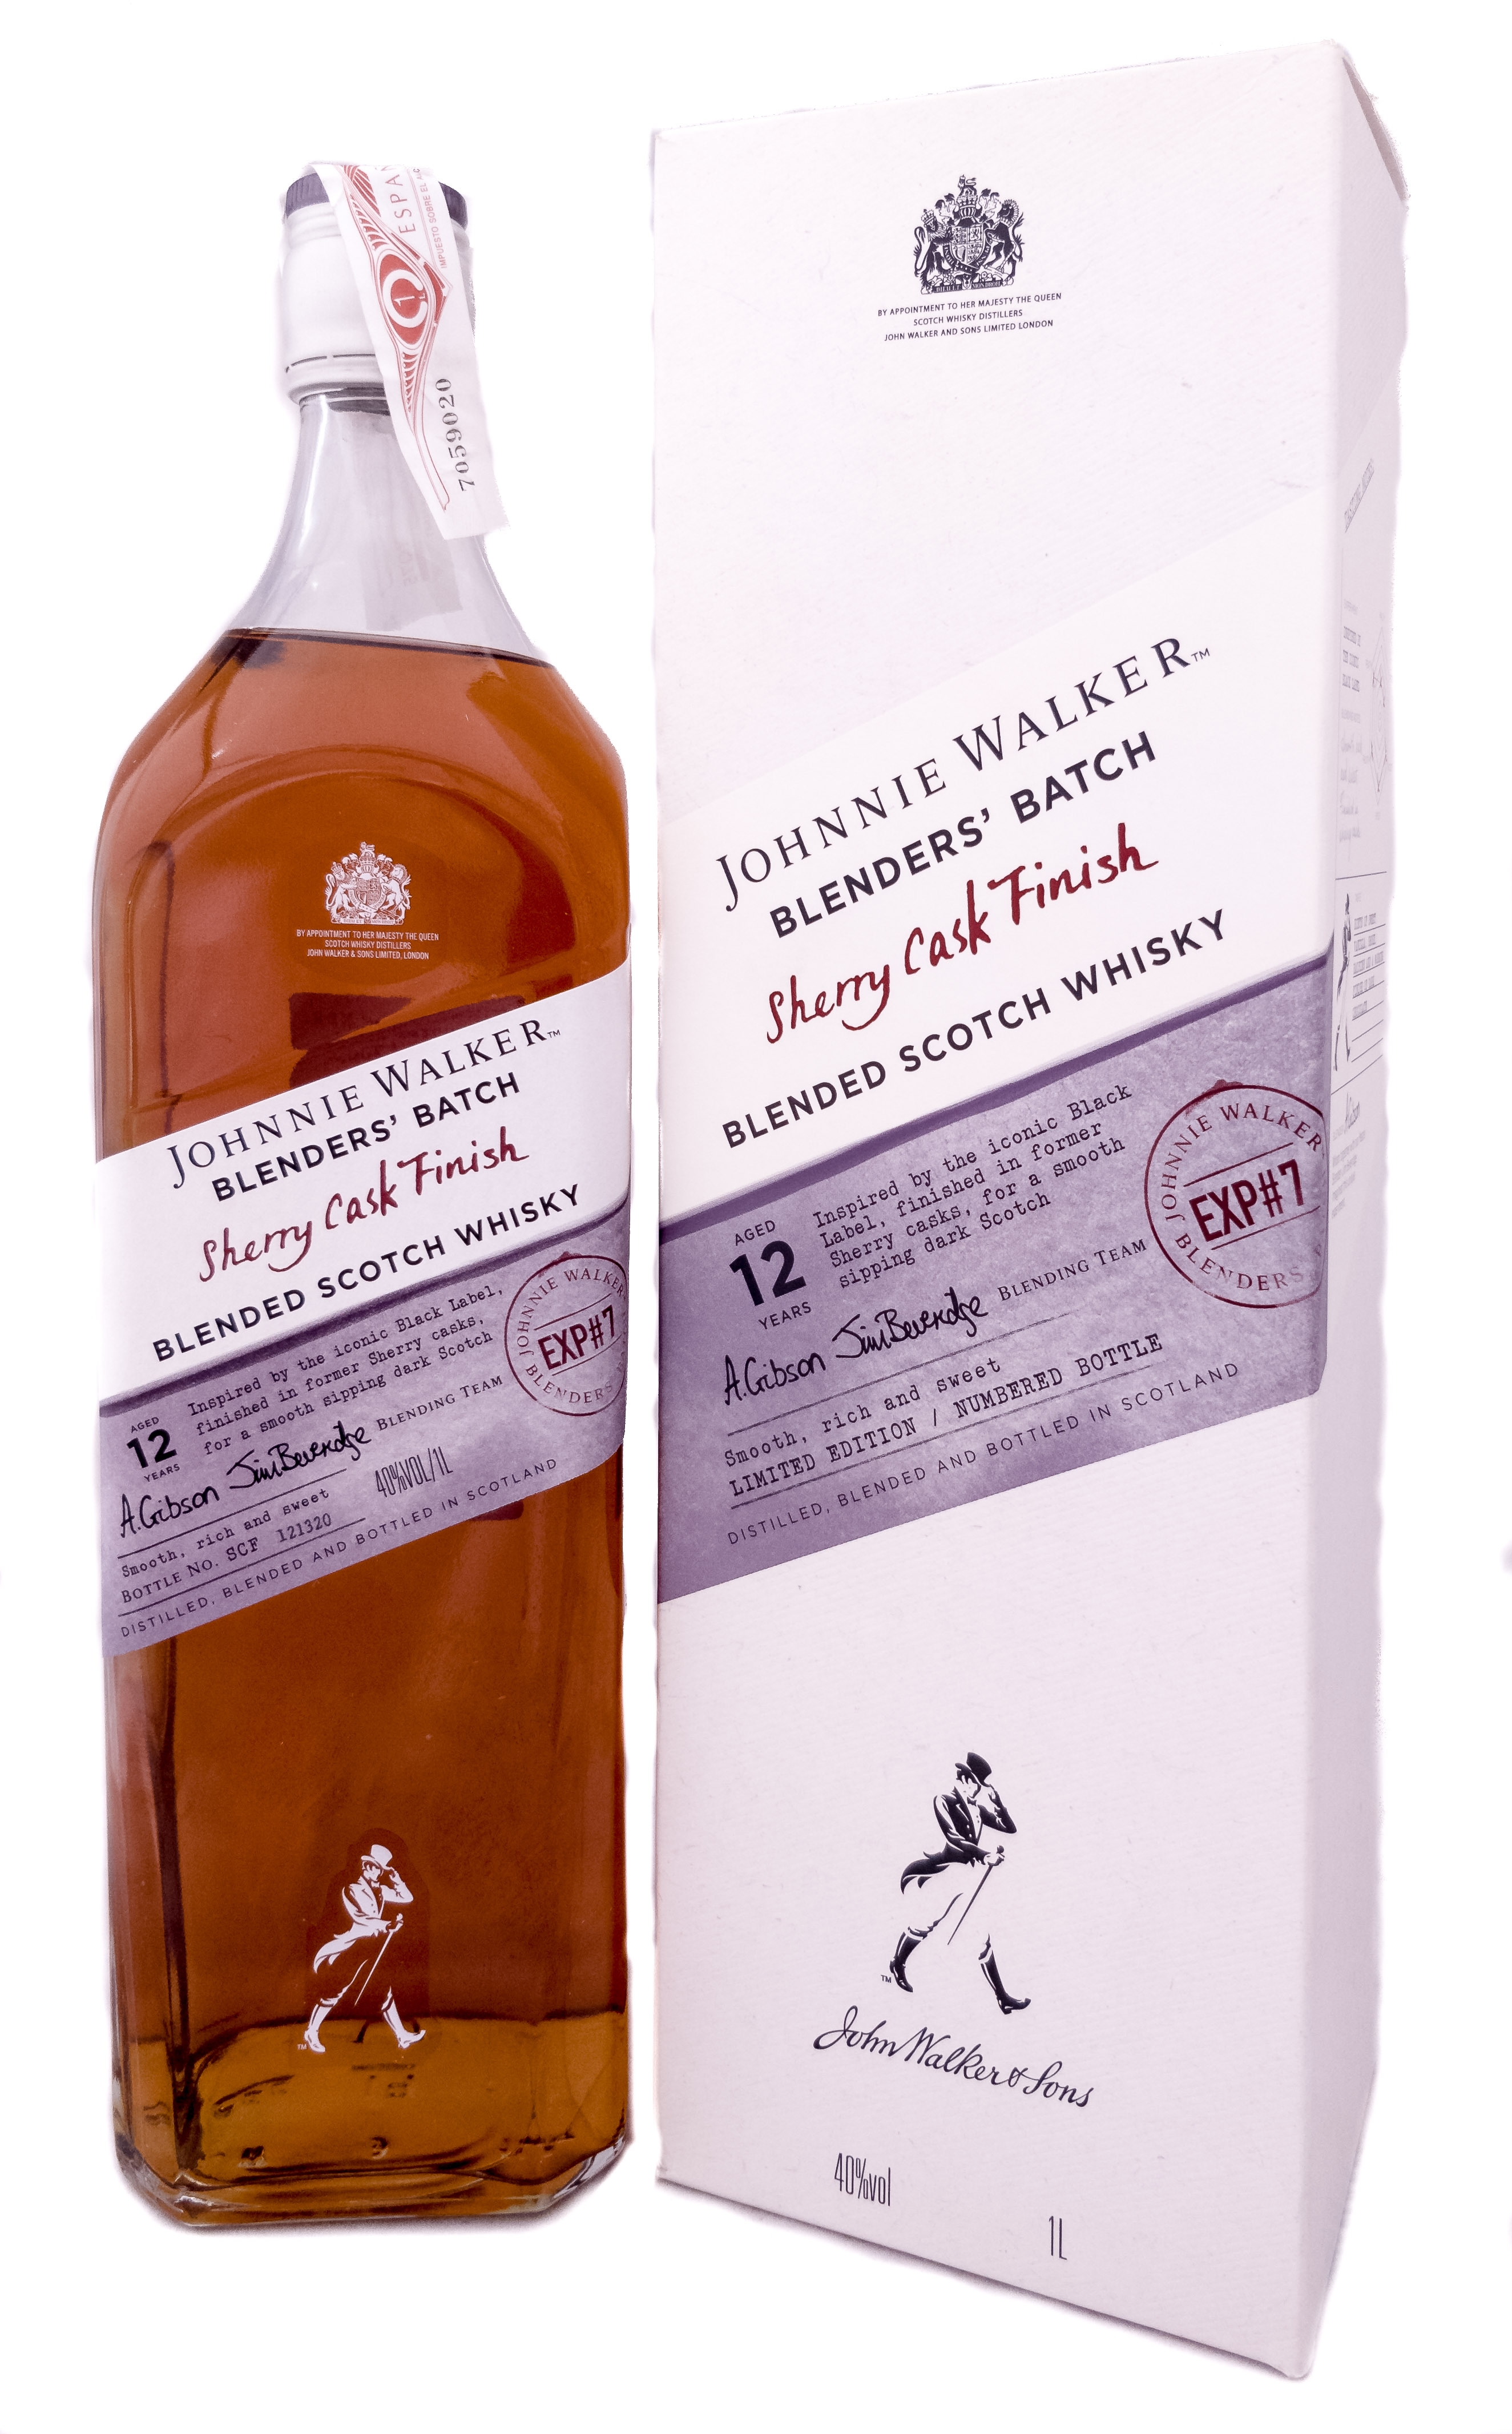 Johnnie Walker Blenders Batch Sherry Cask Finish Boxed Bottle At The Best Buy Cheap With Bargains | Yo Pongo El Hielo